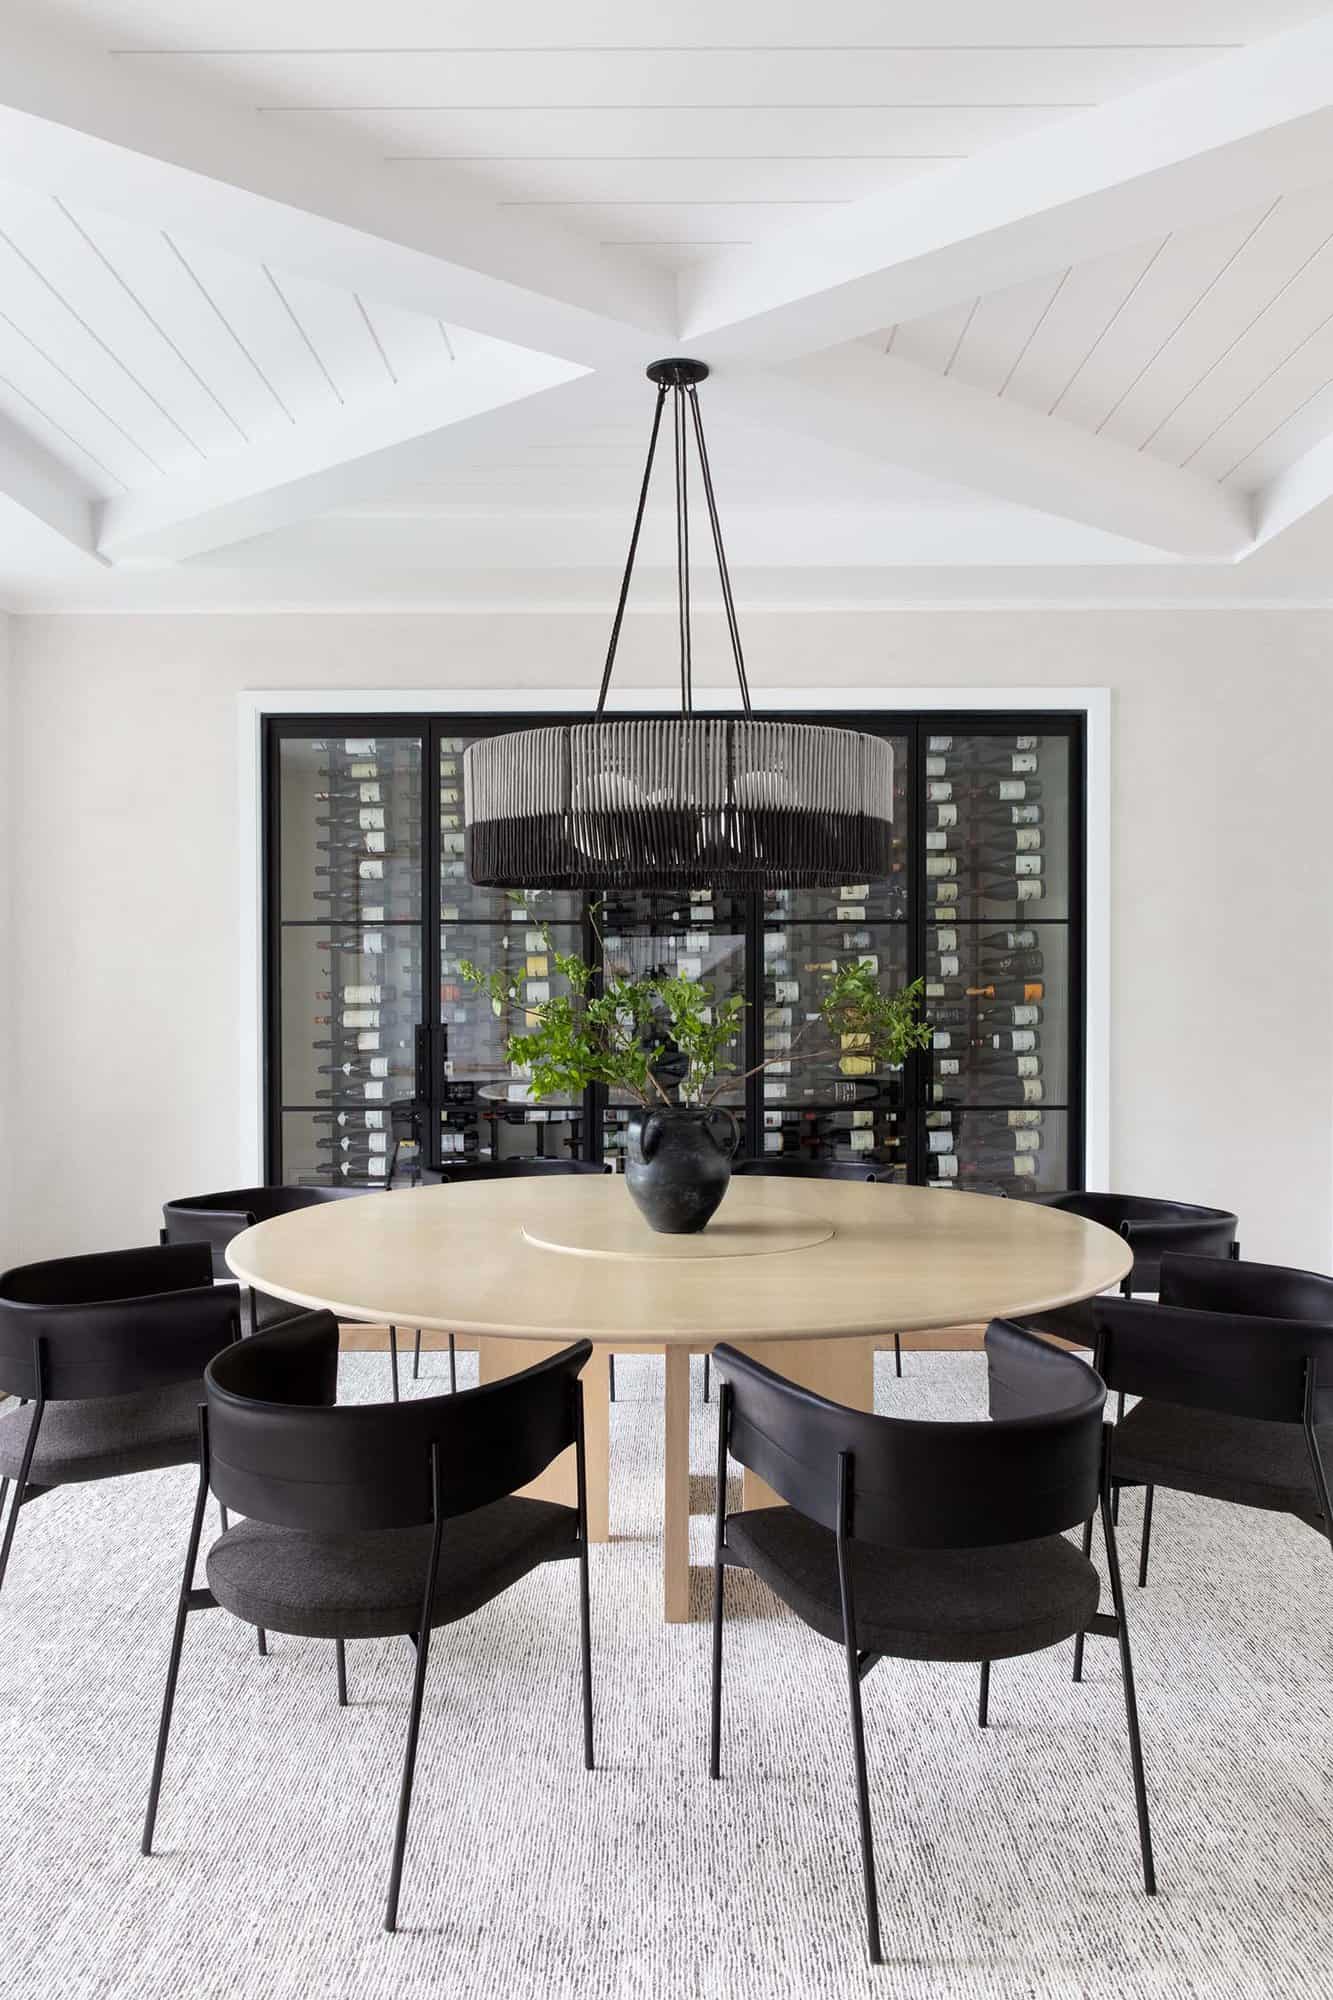 transitional style dining room with a wine cellar